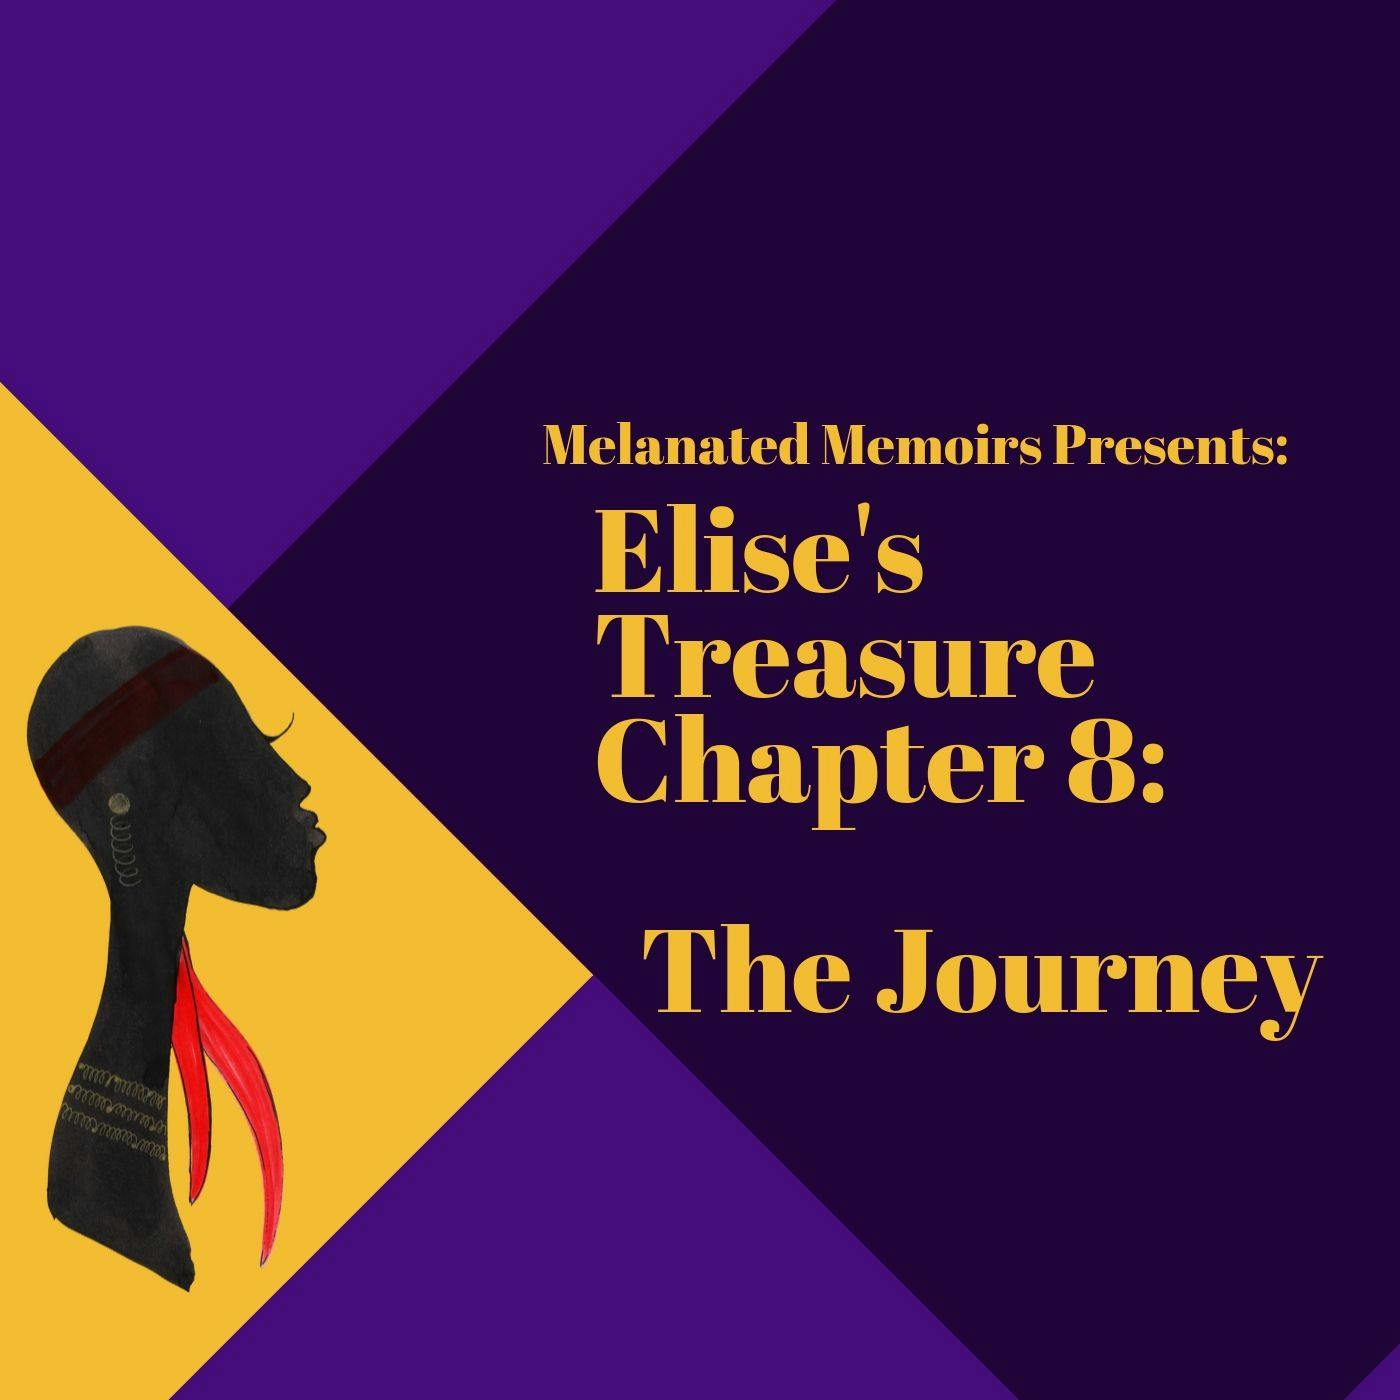 Elise's Treasure Chapter 8: The Journey